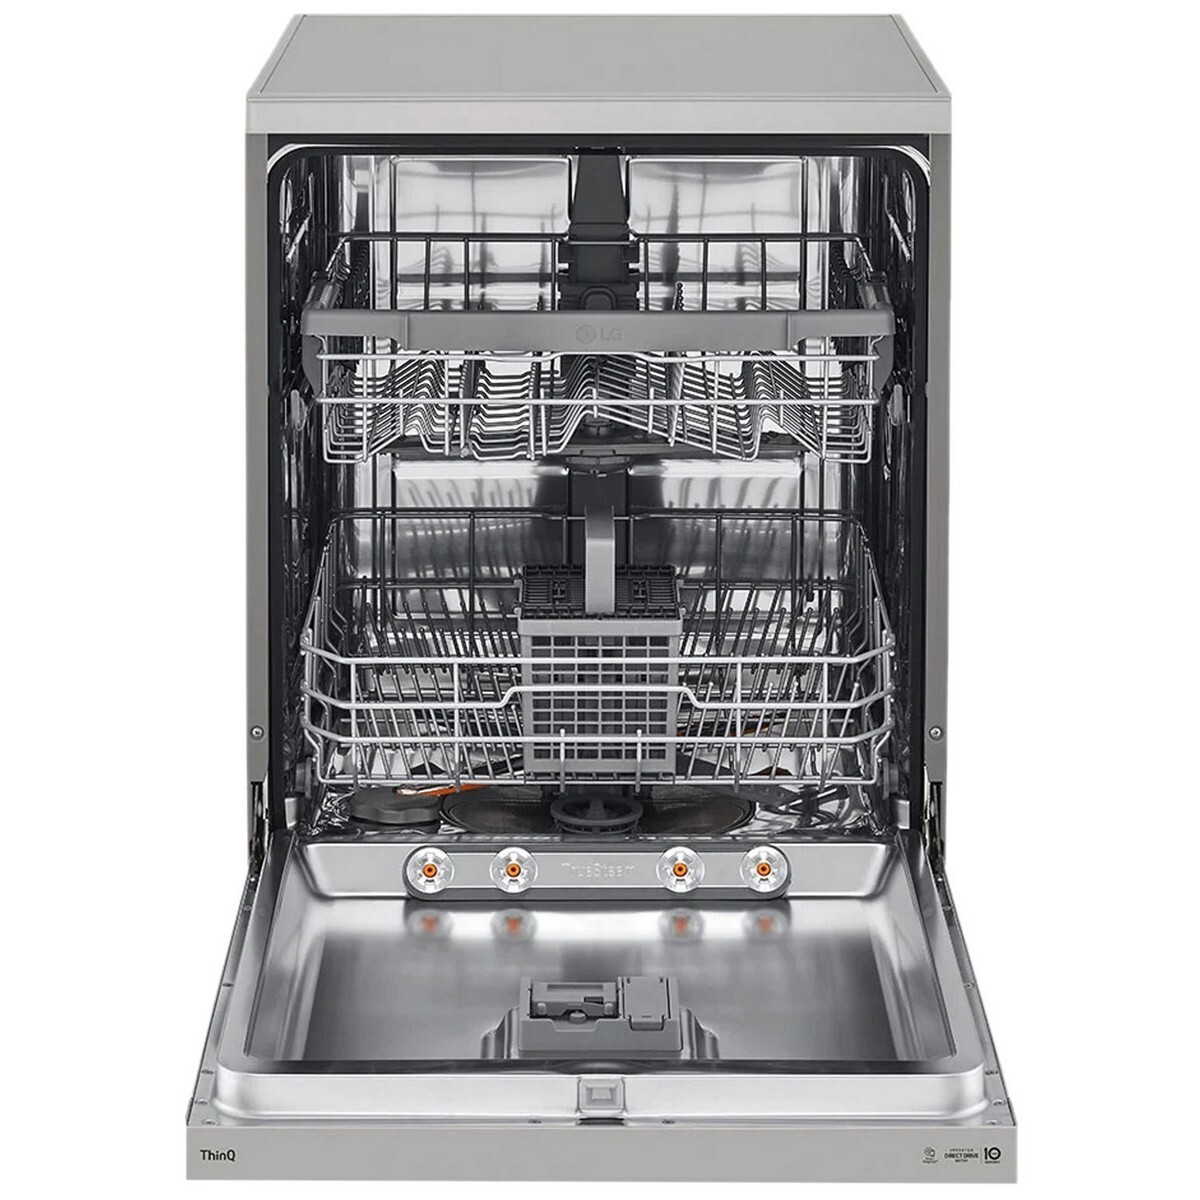 LG Direct Drive Technology Dish Washer DFB532FP,Silver